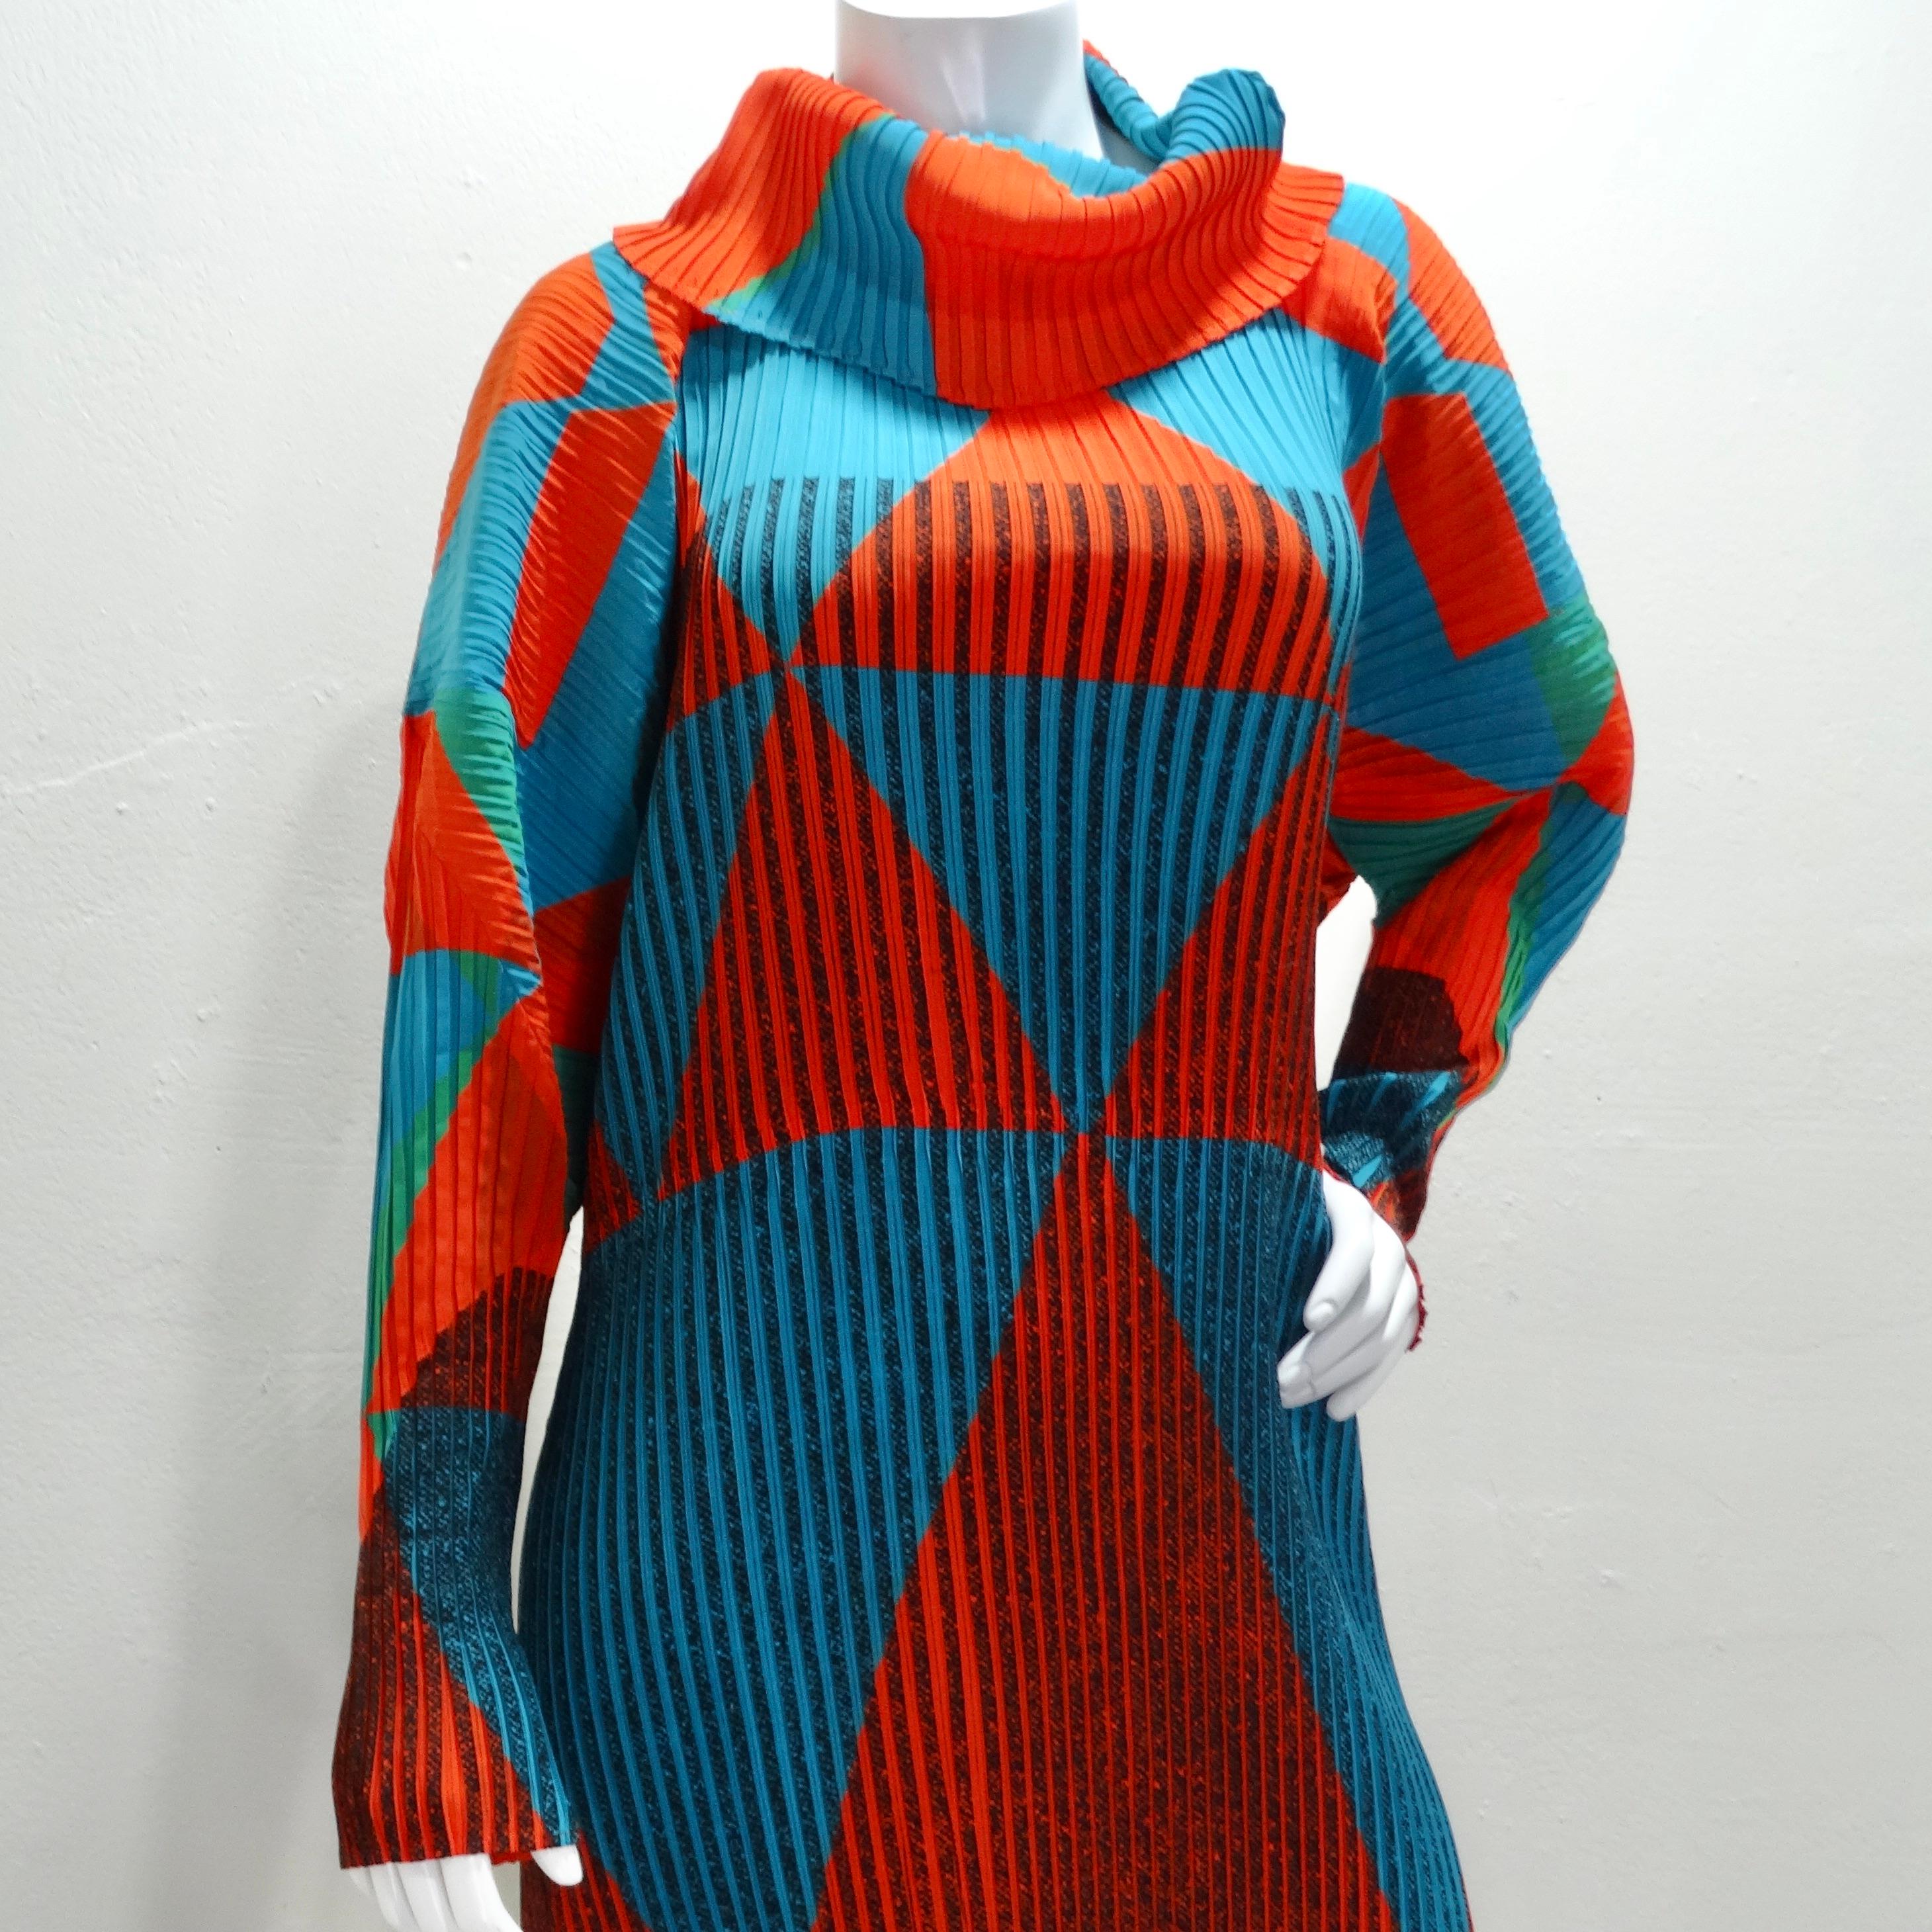 The Issey Miyake Orange Blue Pleated 1990s Turtleneck Dress is a stunning and rare piece that captures the essence of Issey Miyake's innovative approach to pleating and textiles. This mid-length dress features long sleeves and a fold-over